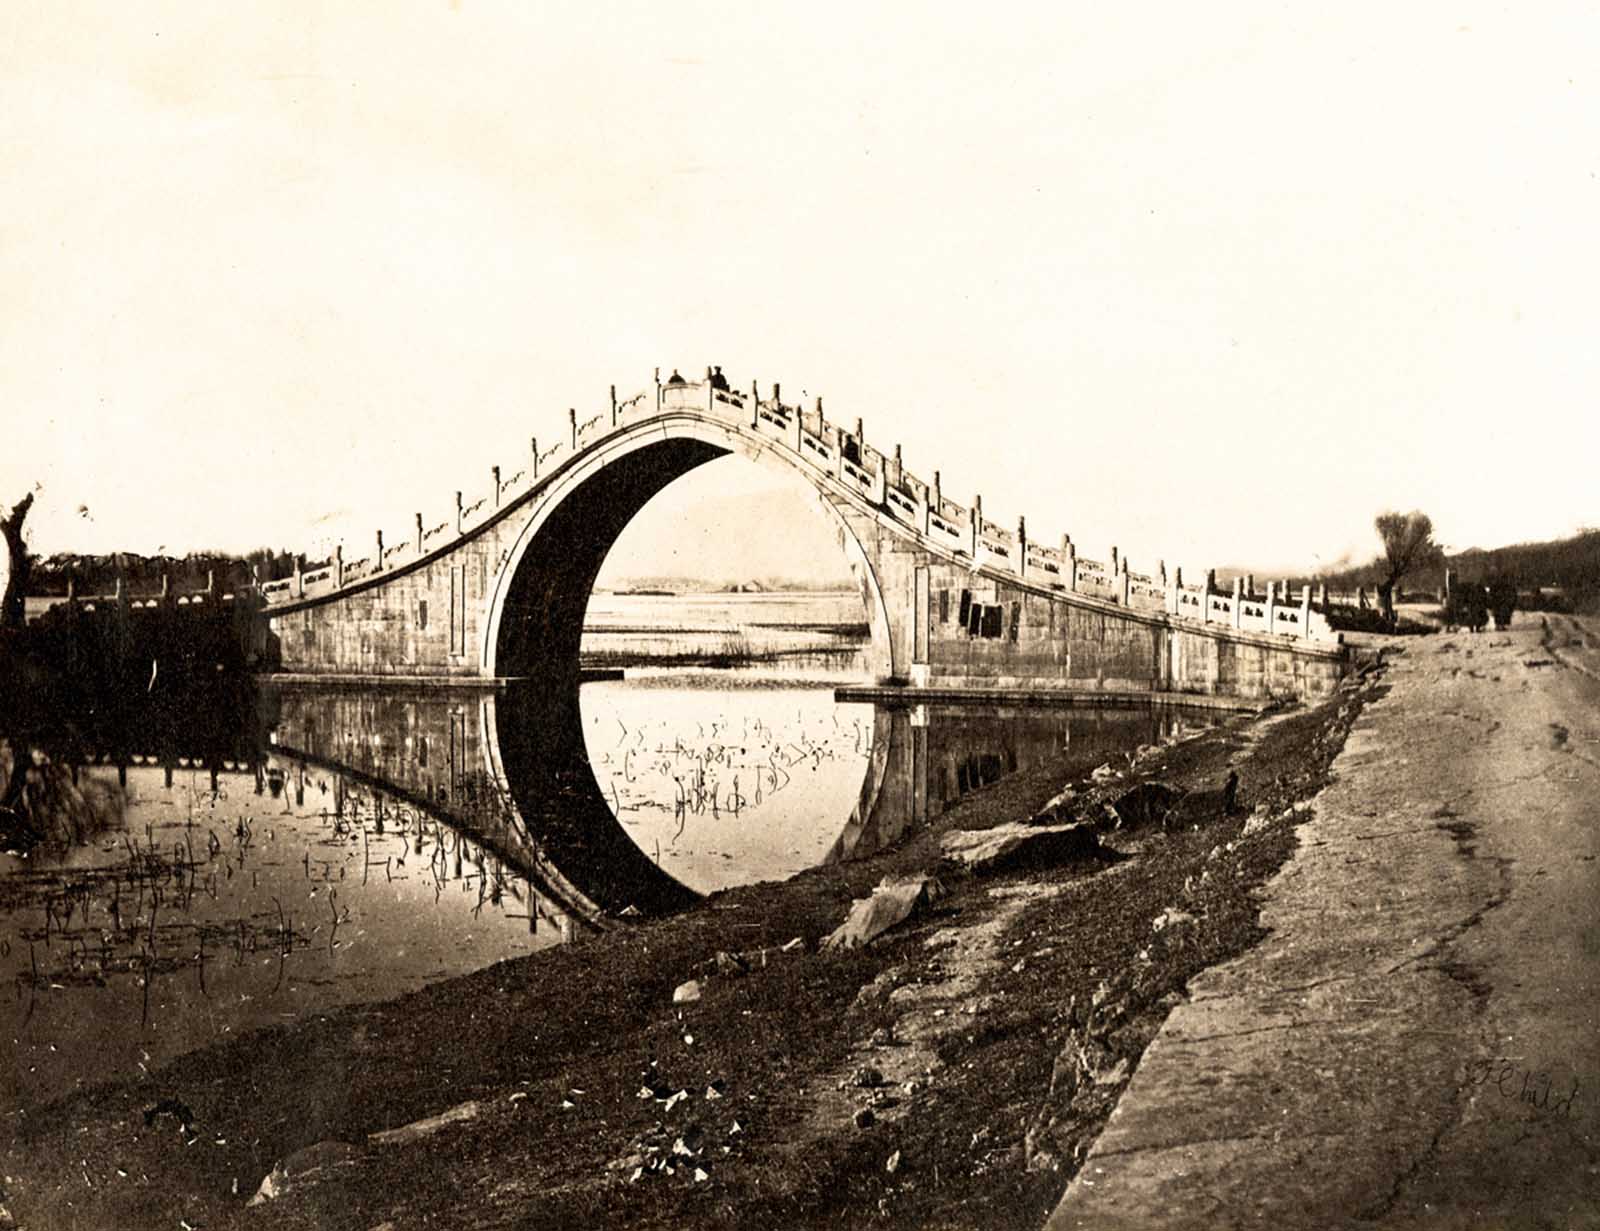 A view of Jade Belt Bridge, which still stands on the grounds of the Summer Palace on the western shore of Kunming Lake. The arched bridge, a traditional Chinese design, permitted passage of the Emperor’s dragon boat.